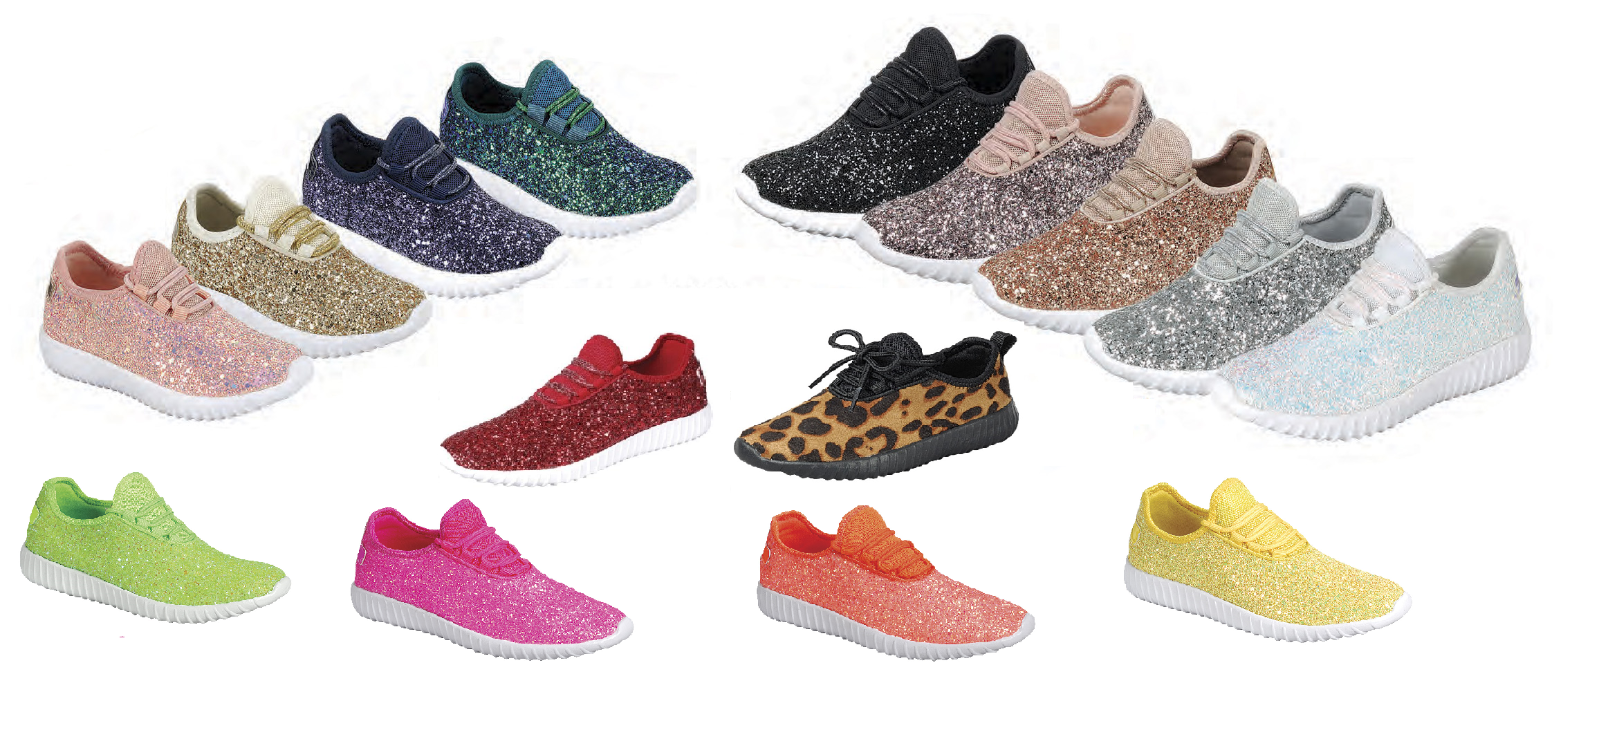 Girls Youth Kids Sequin Glitter Lace Up Fashion Shoes Comfort Athletic Sneakers